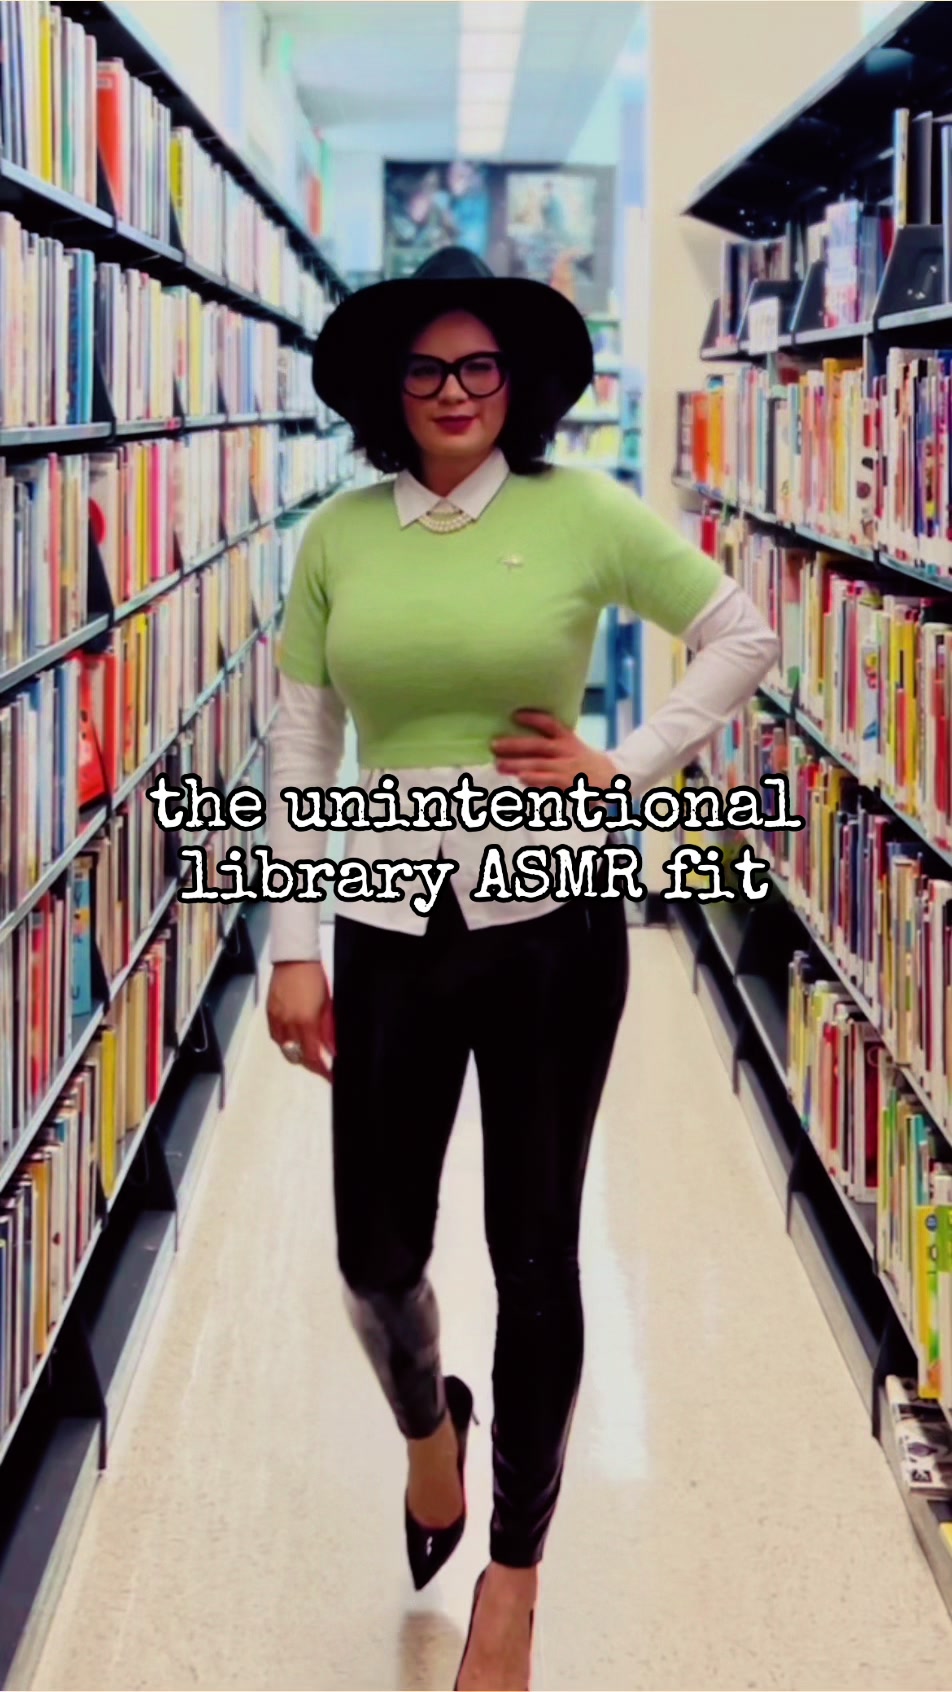 @The Radical Librarian